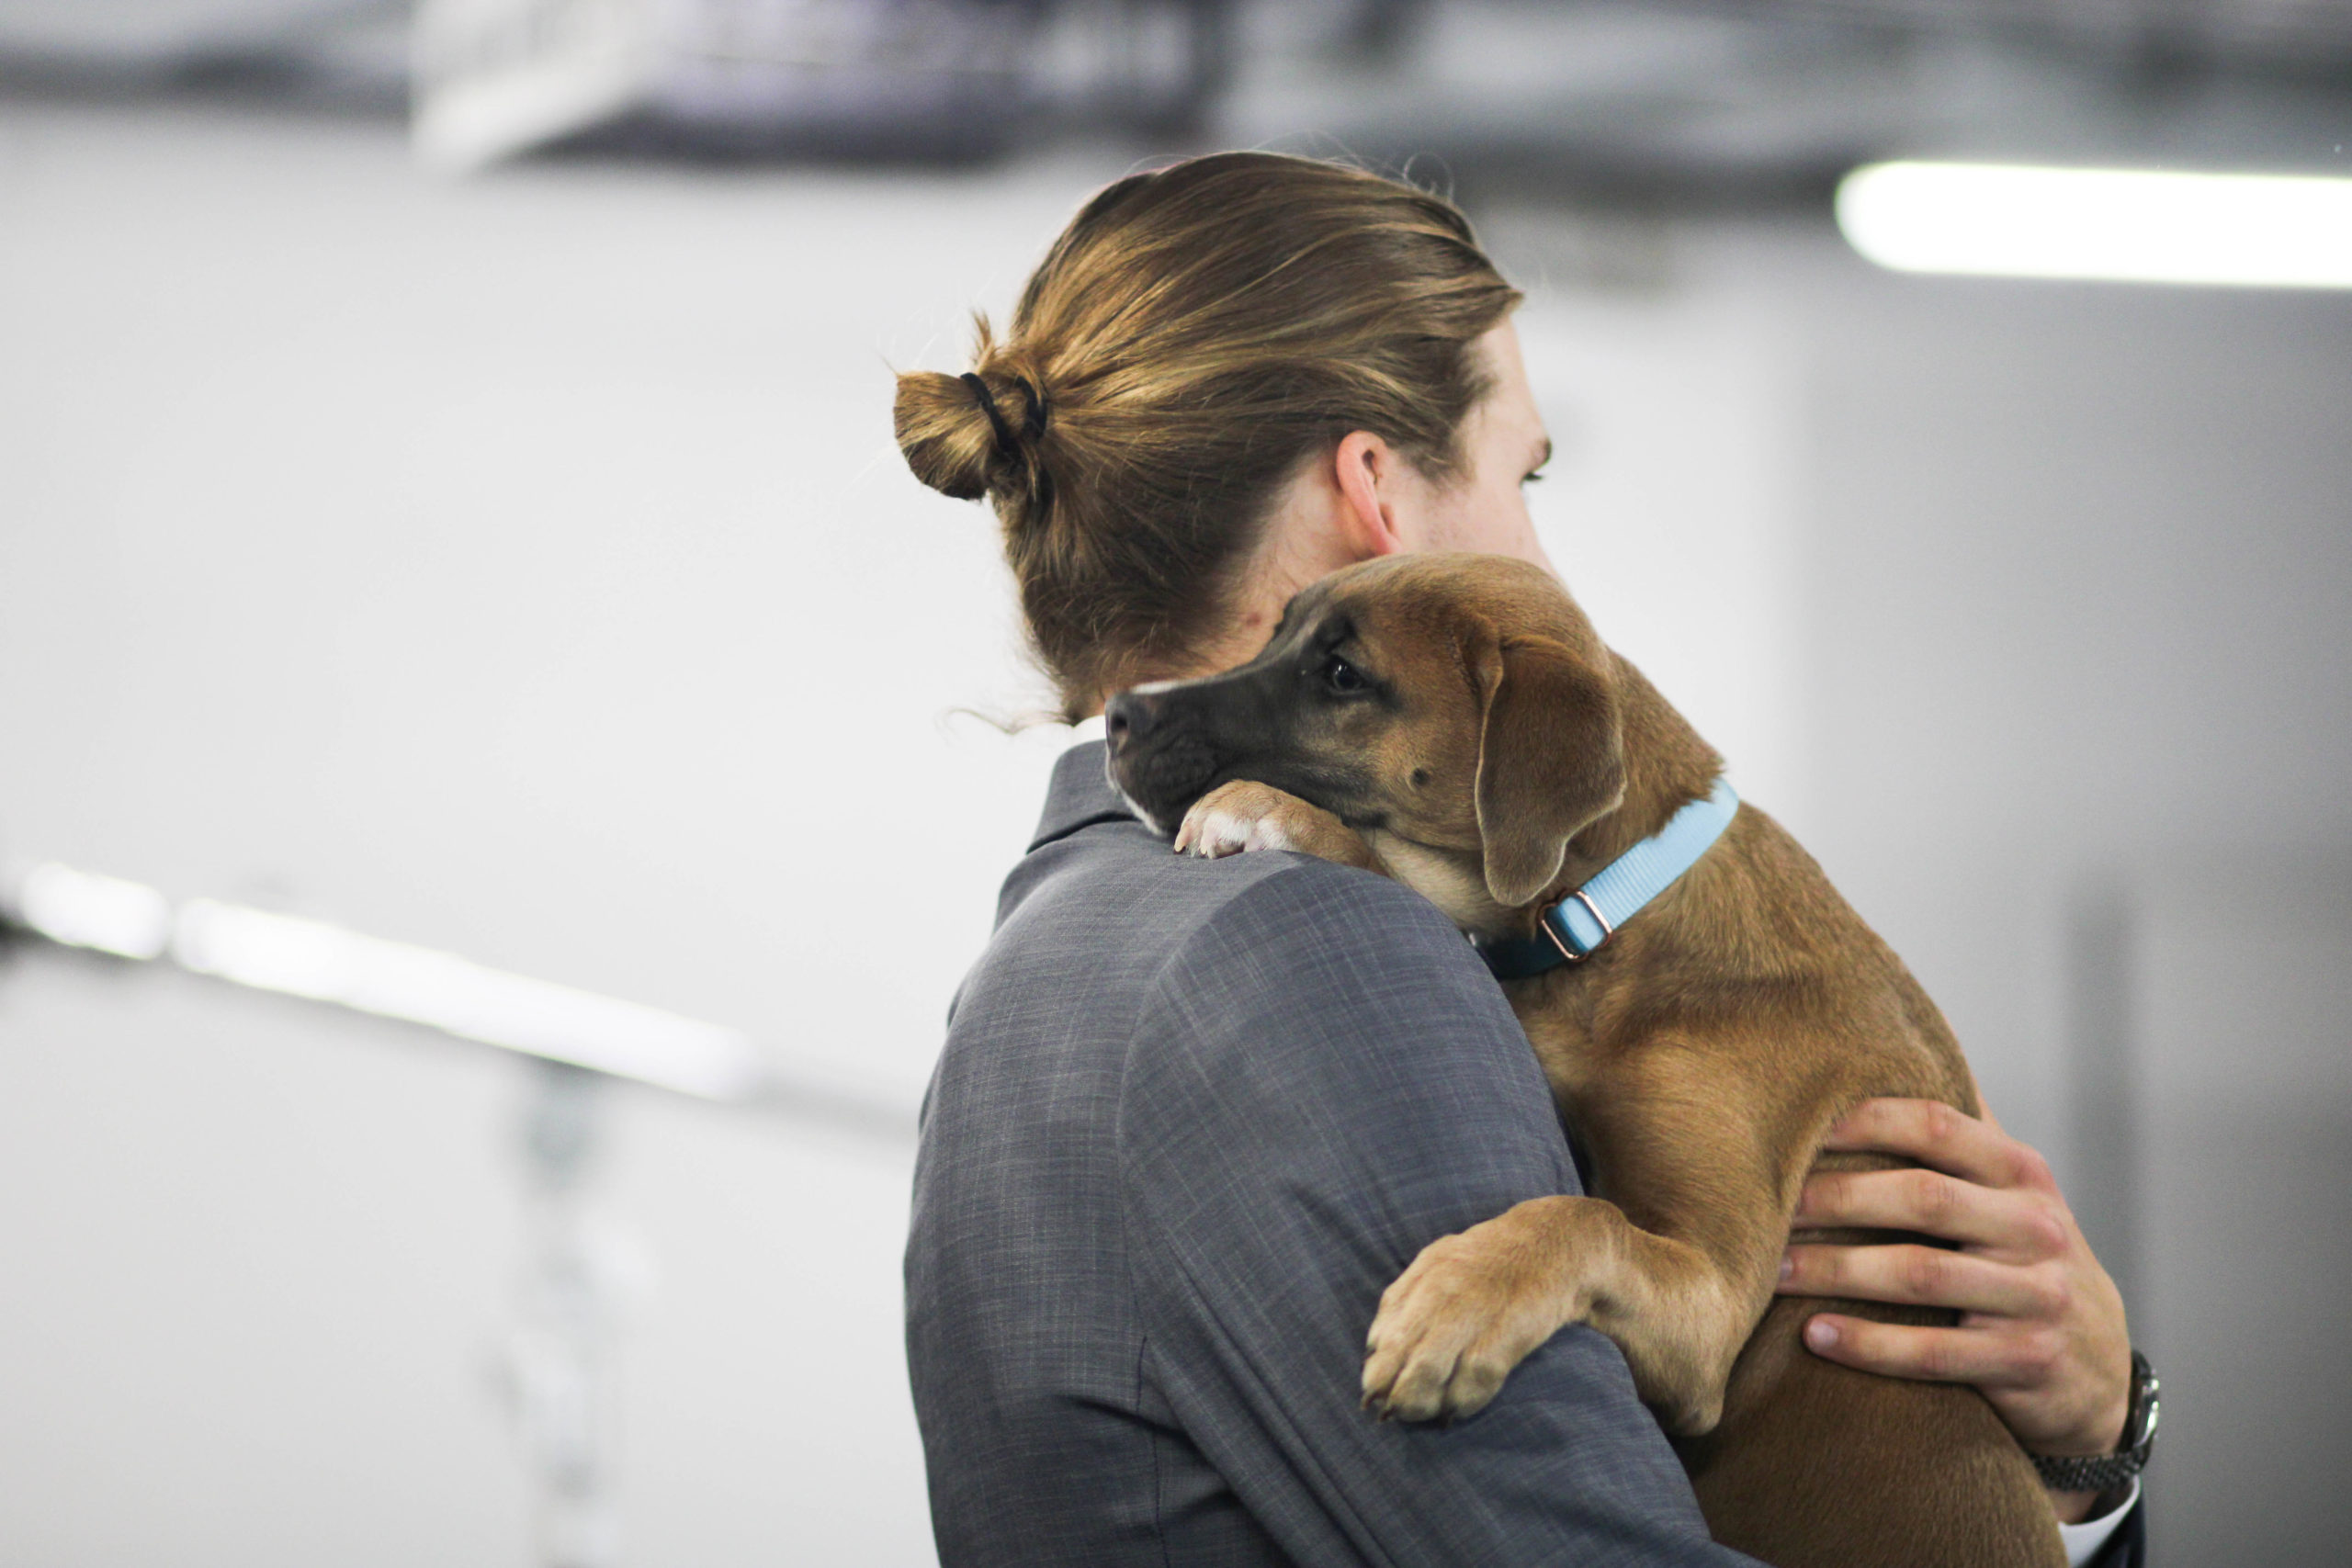 The Washington Capitals posed with adorable puppies for a calendar